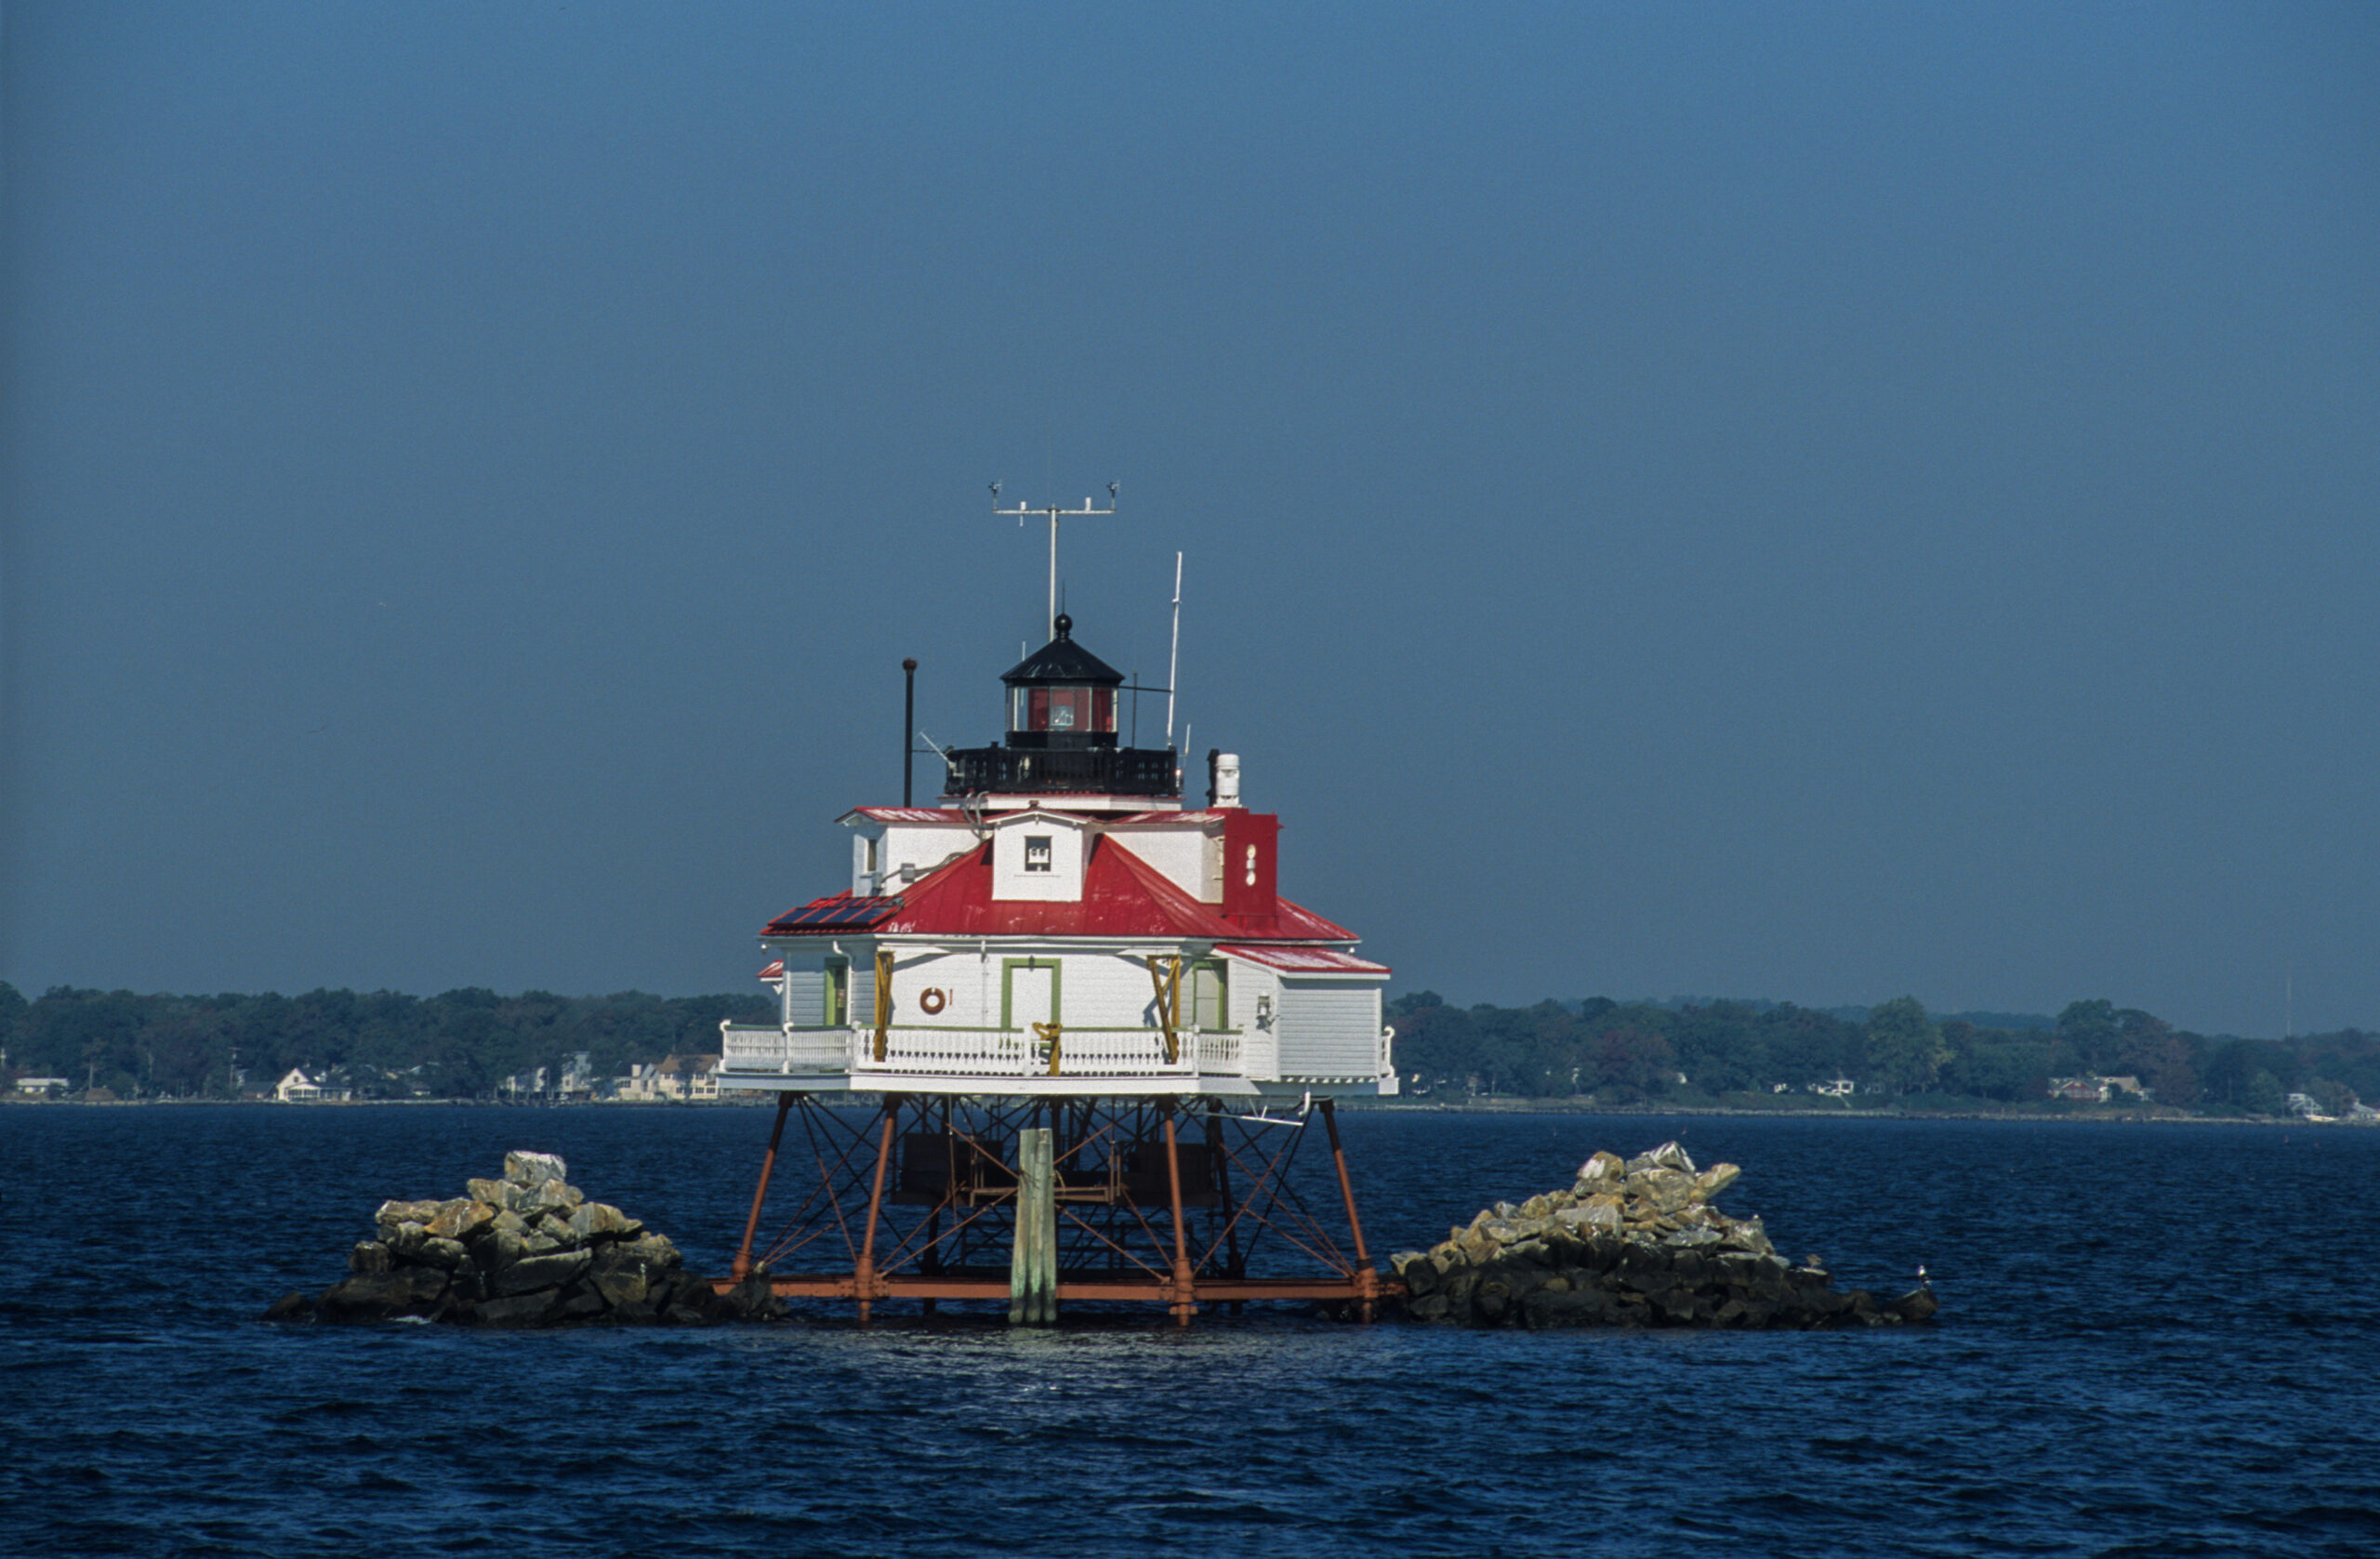 Bay destinations, including picturesque lighthouses, for memorable boating excursions